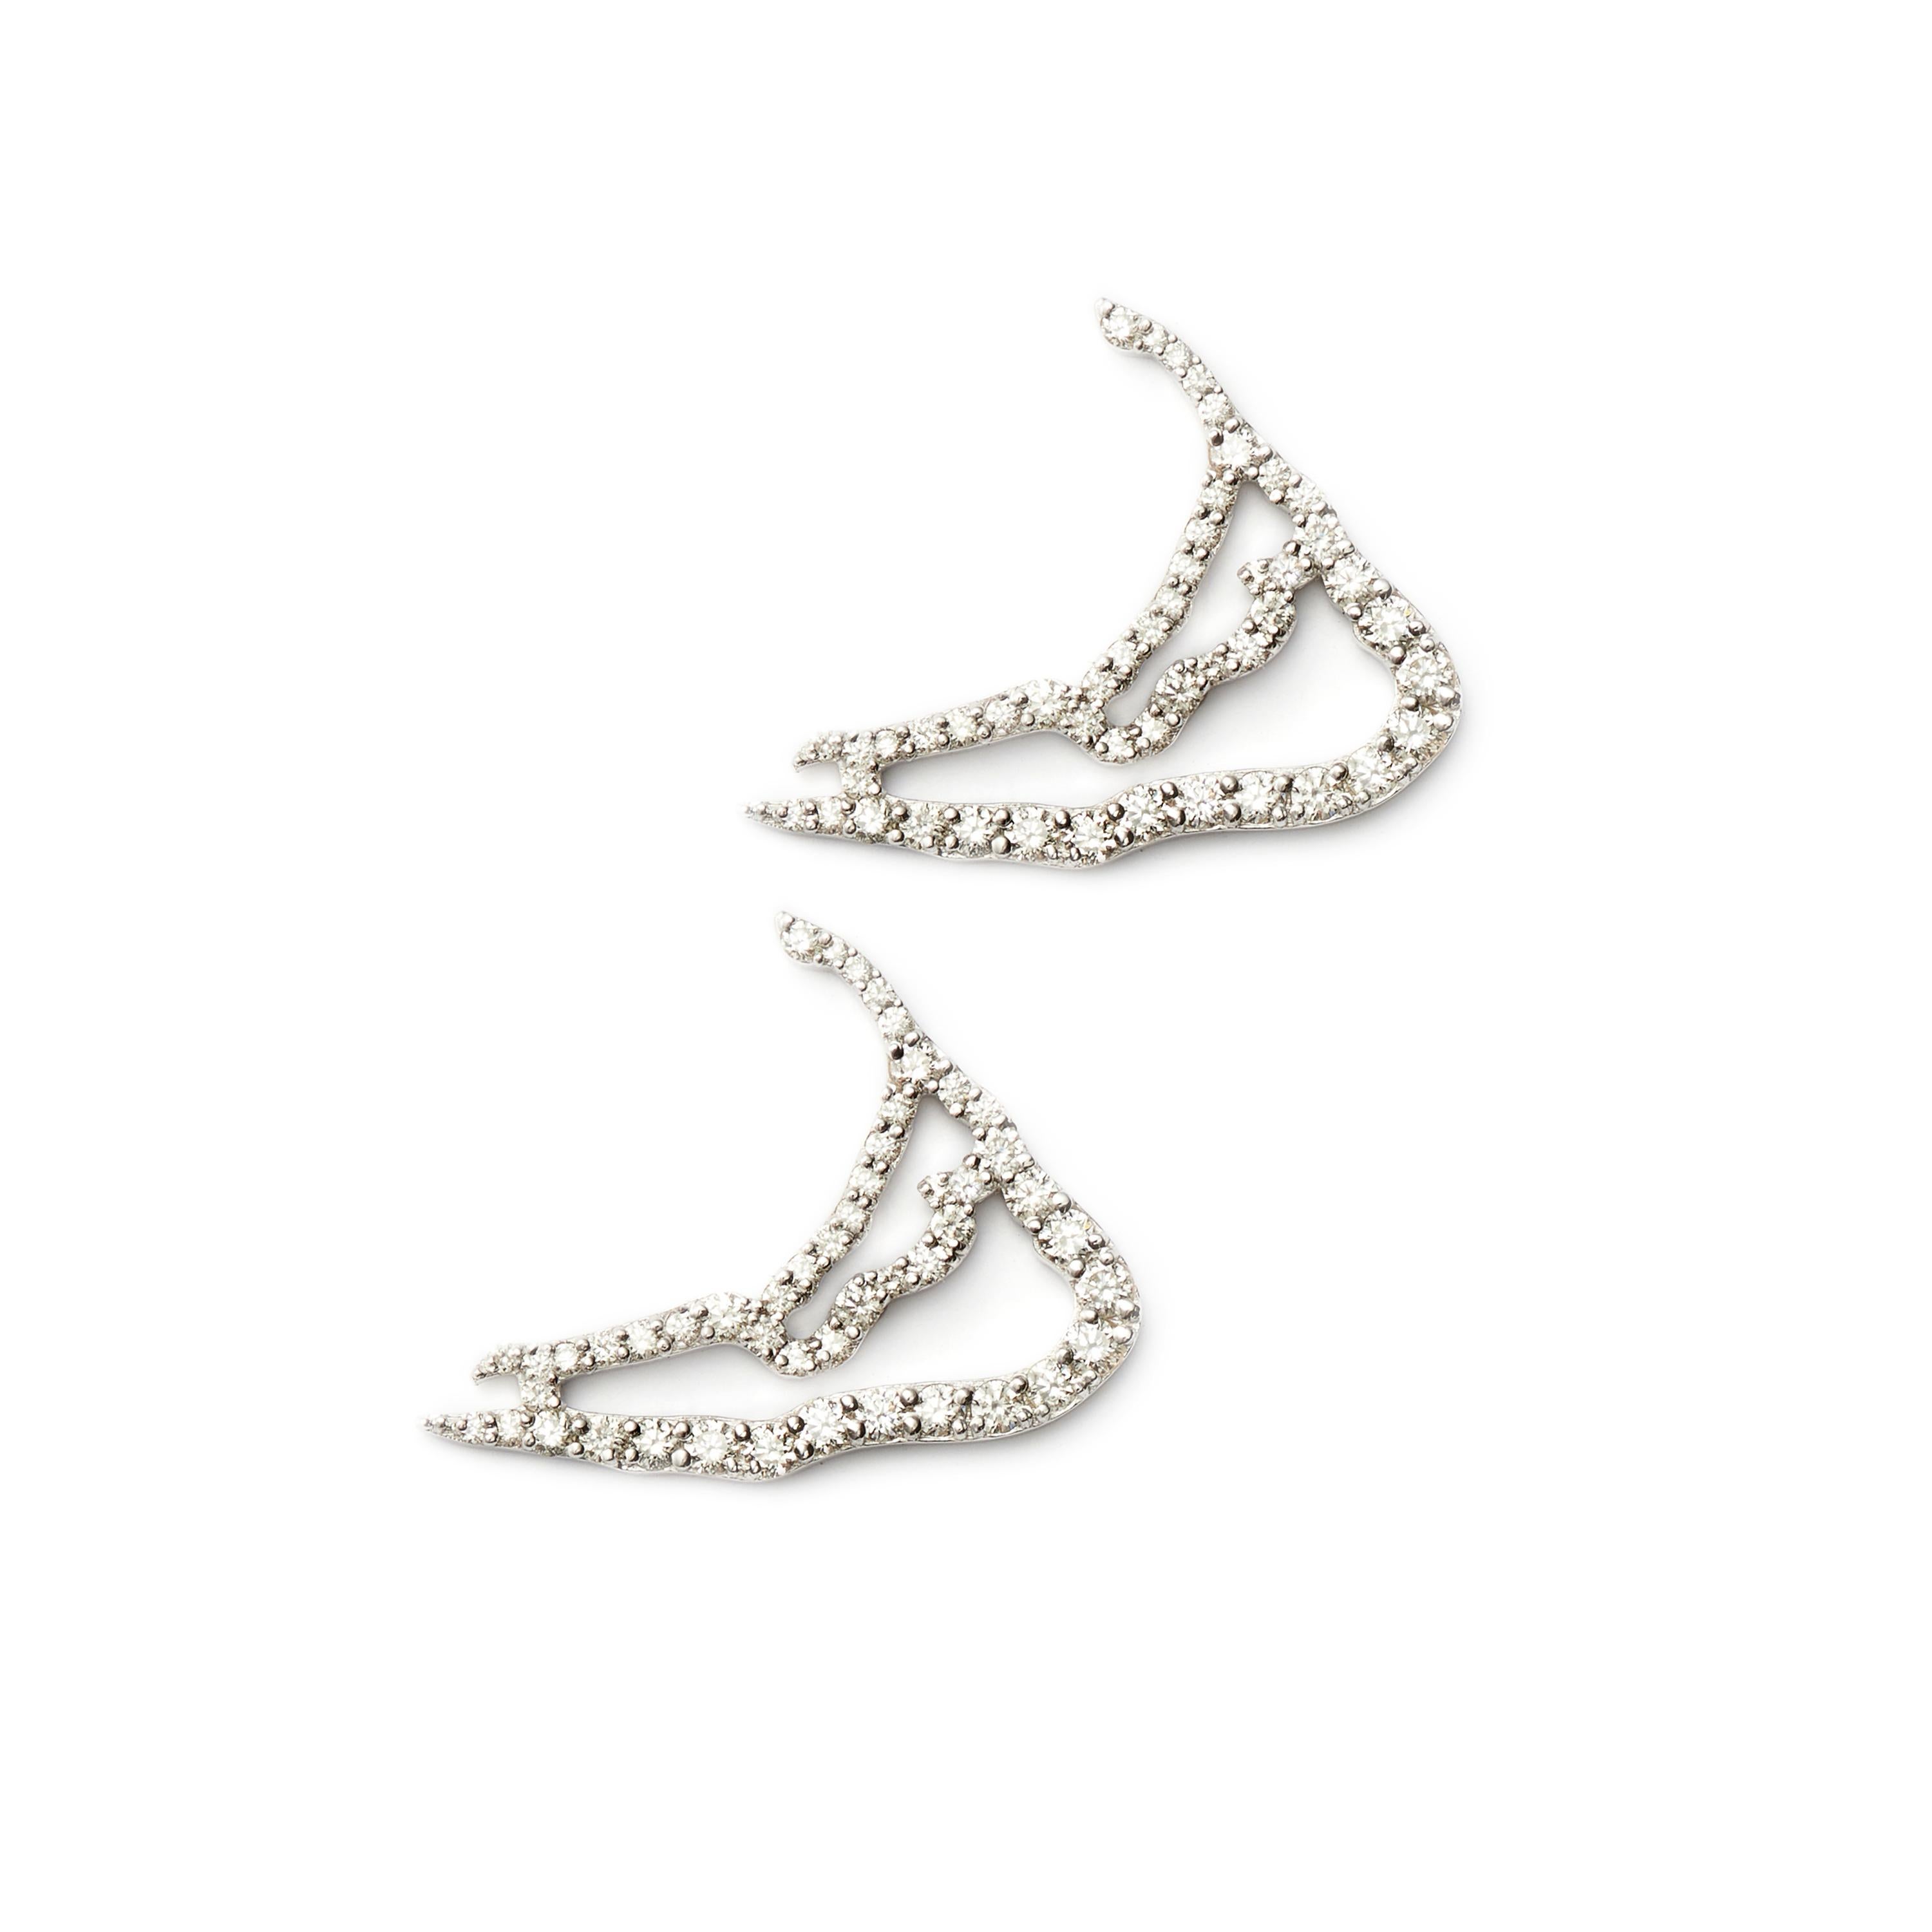 The shape of Nantucket Island is as iconic as the island itself. From the Diamond Island™ Collection, these 18 Karat Palladium White Gold earrings, set with diamonds, are striking and timeless.